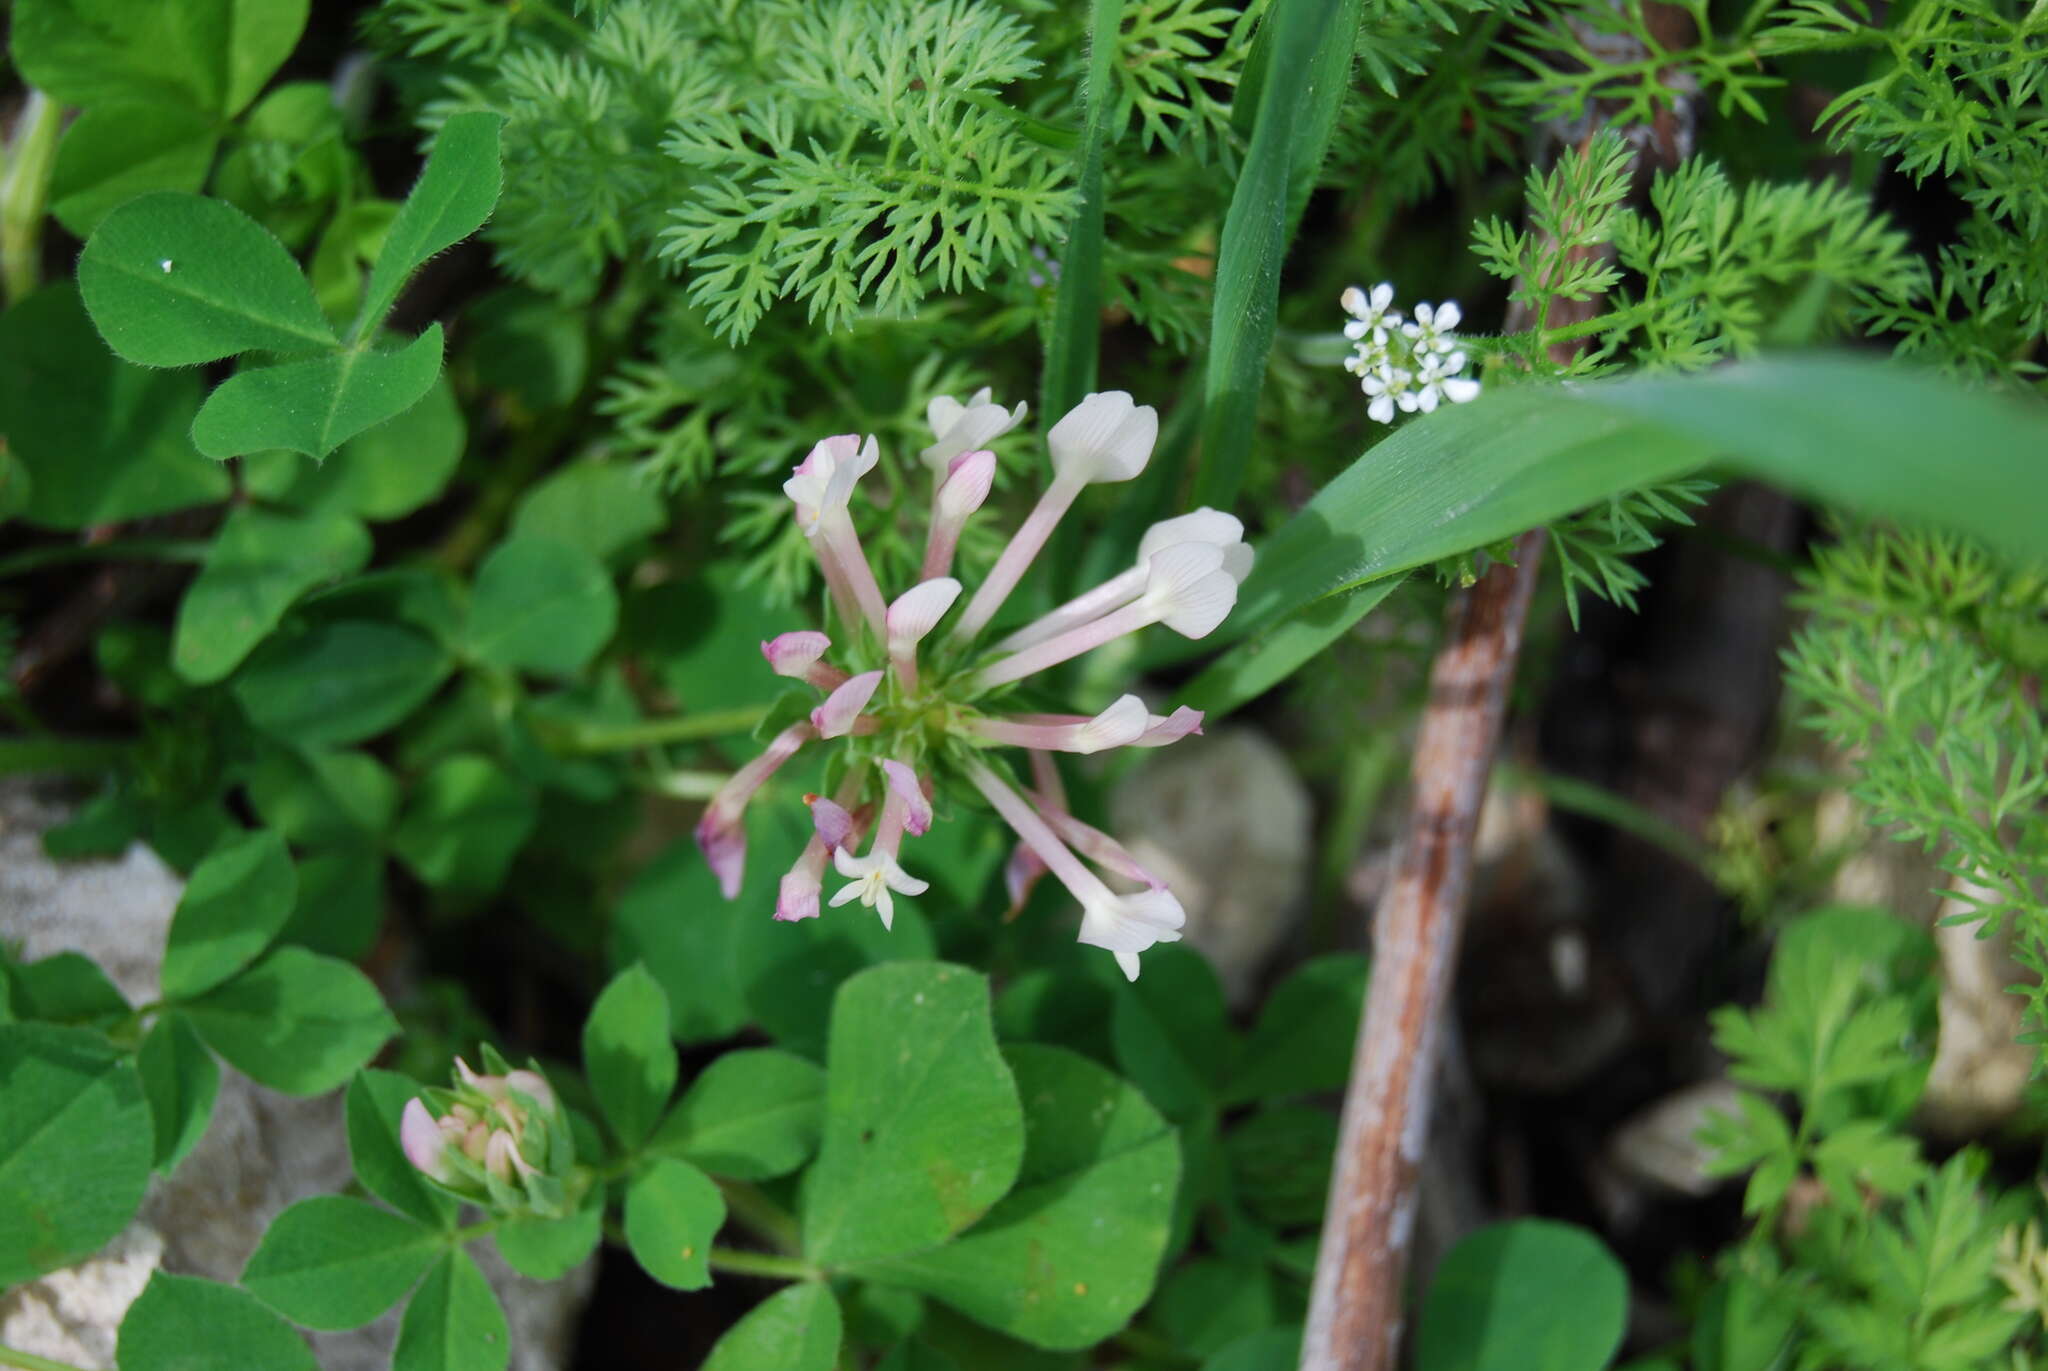 Image of shield clover